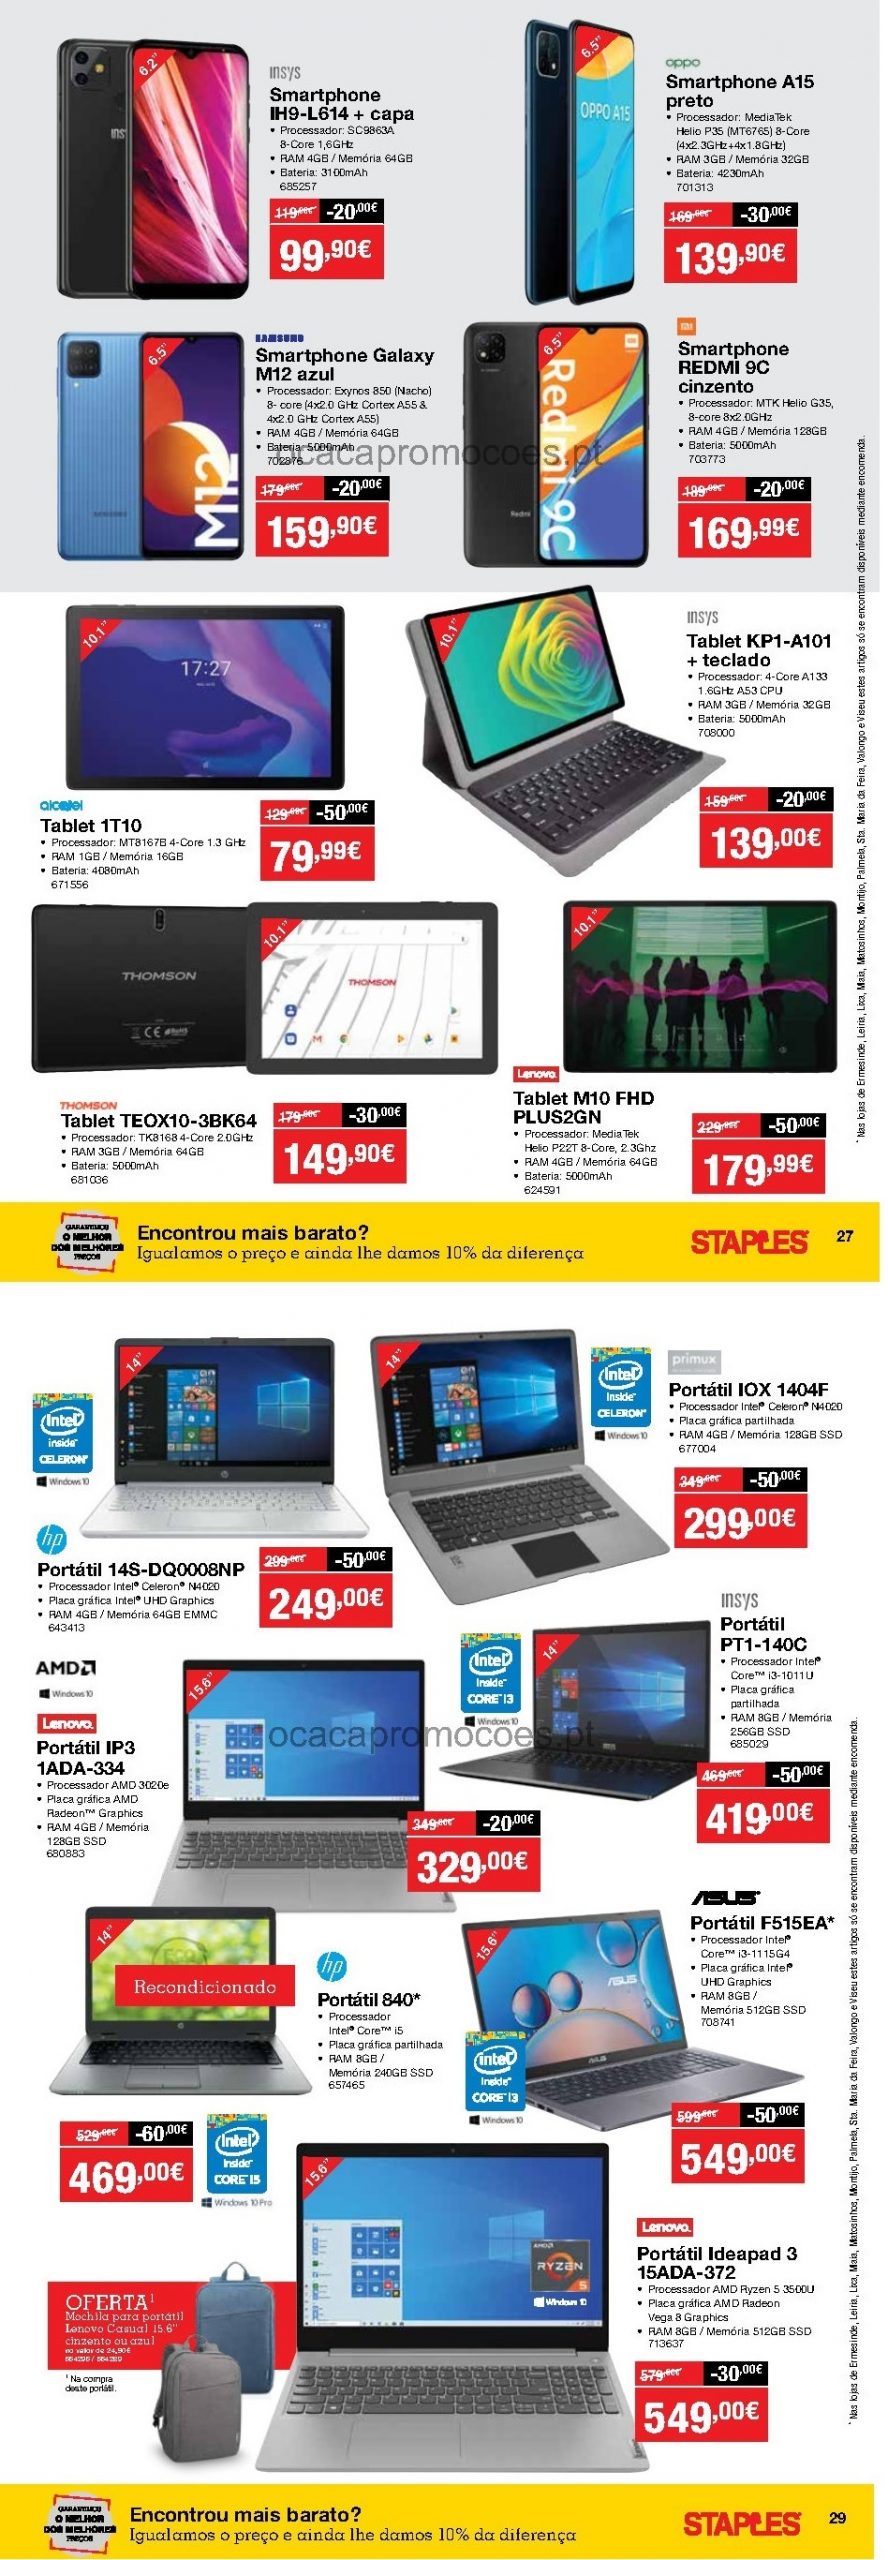 staples promocoes scaled